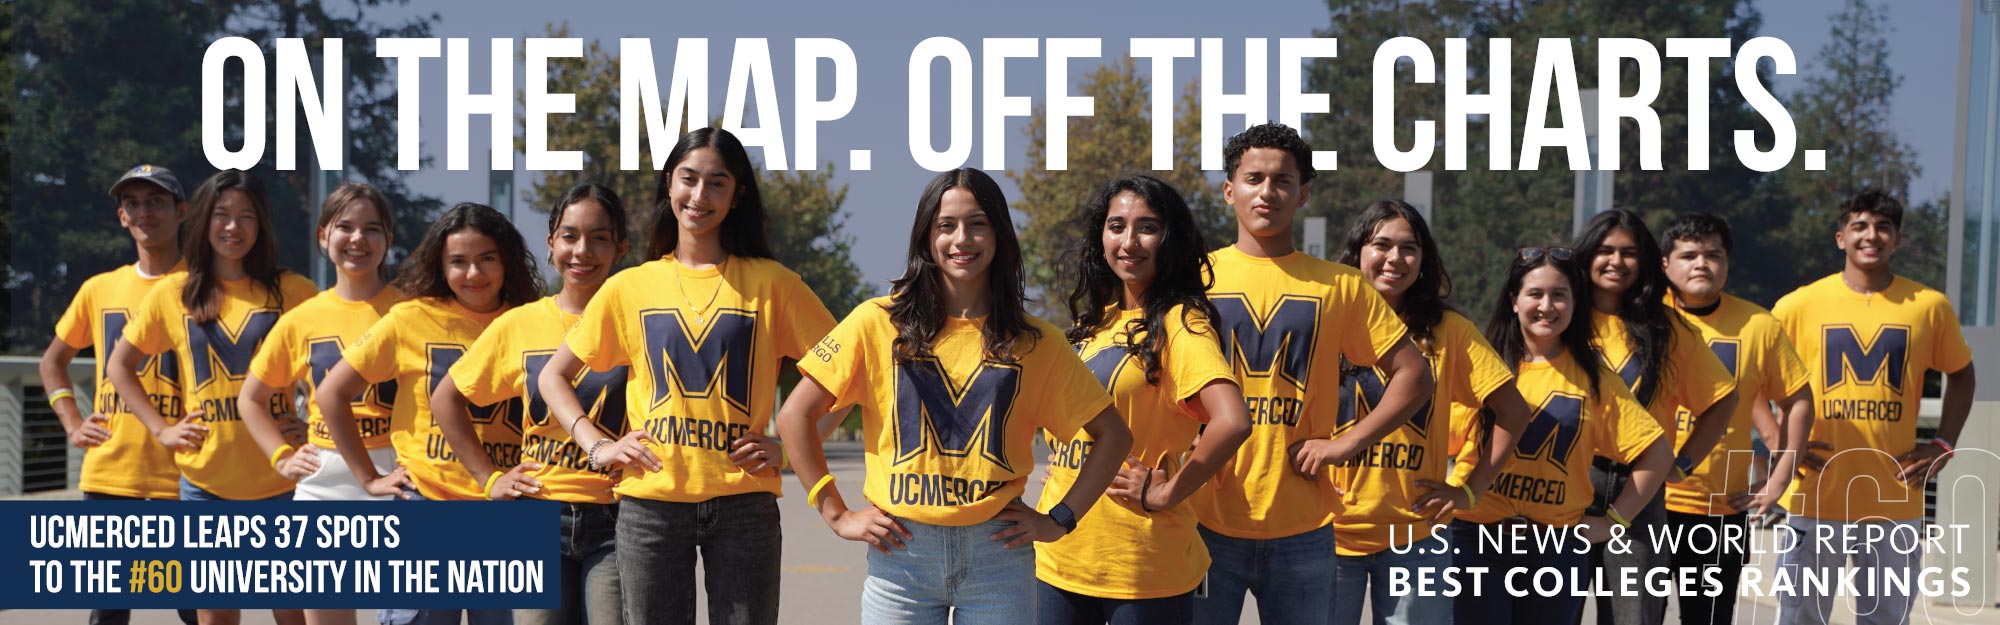 uc merced ranks top 30 university in the nation